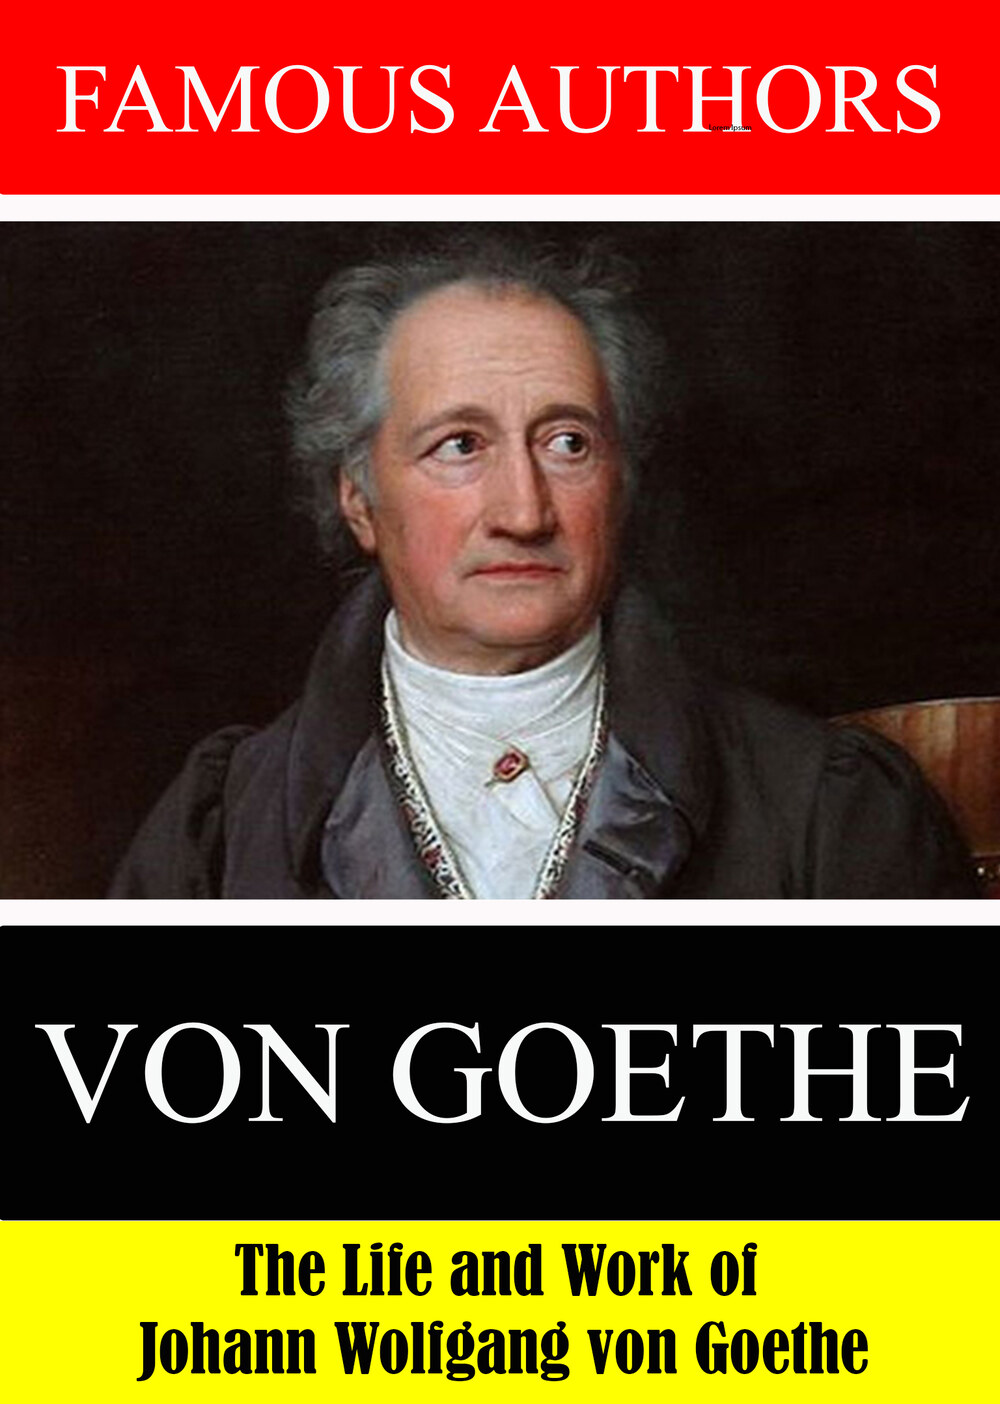 L7884 - Famous Authors: The Life and Work of Johann Wolfgang von Goethe